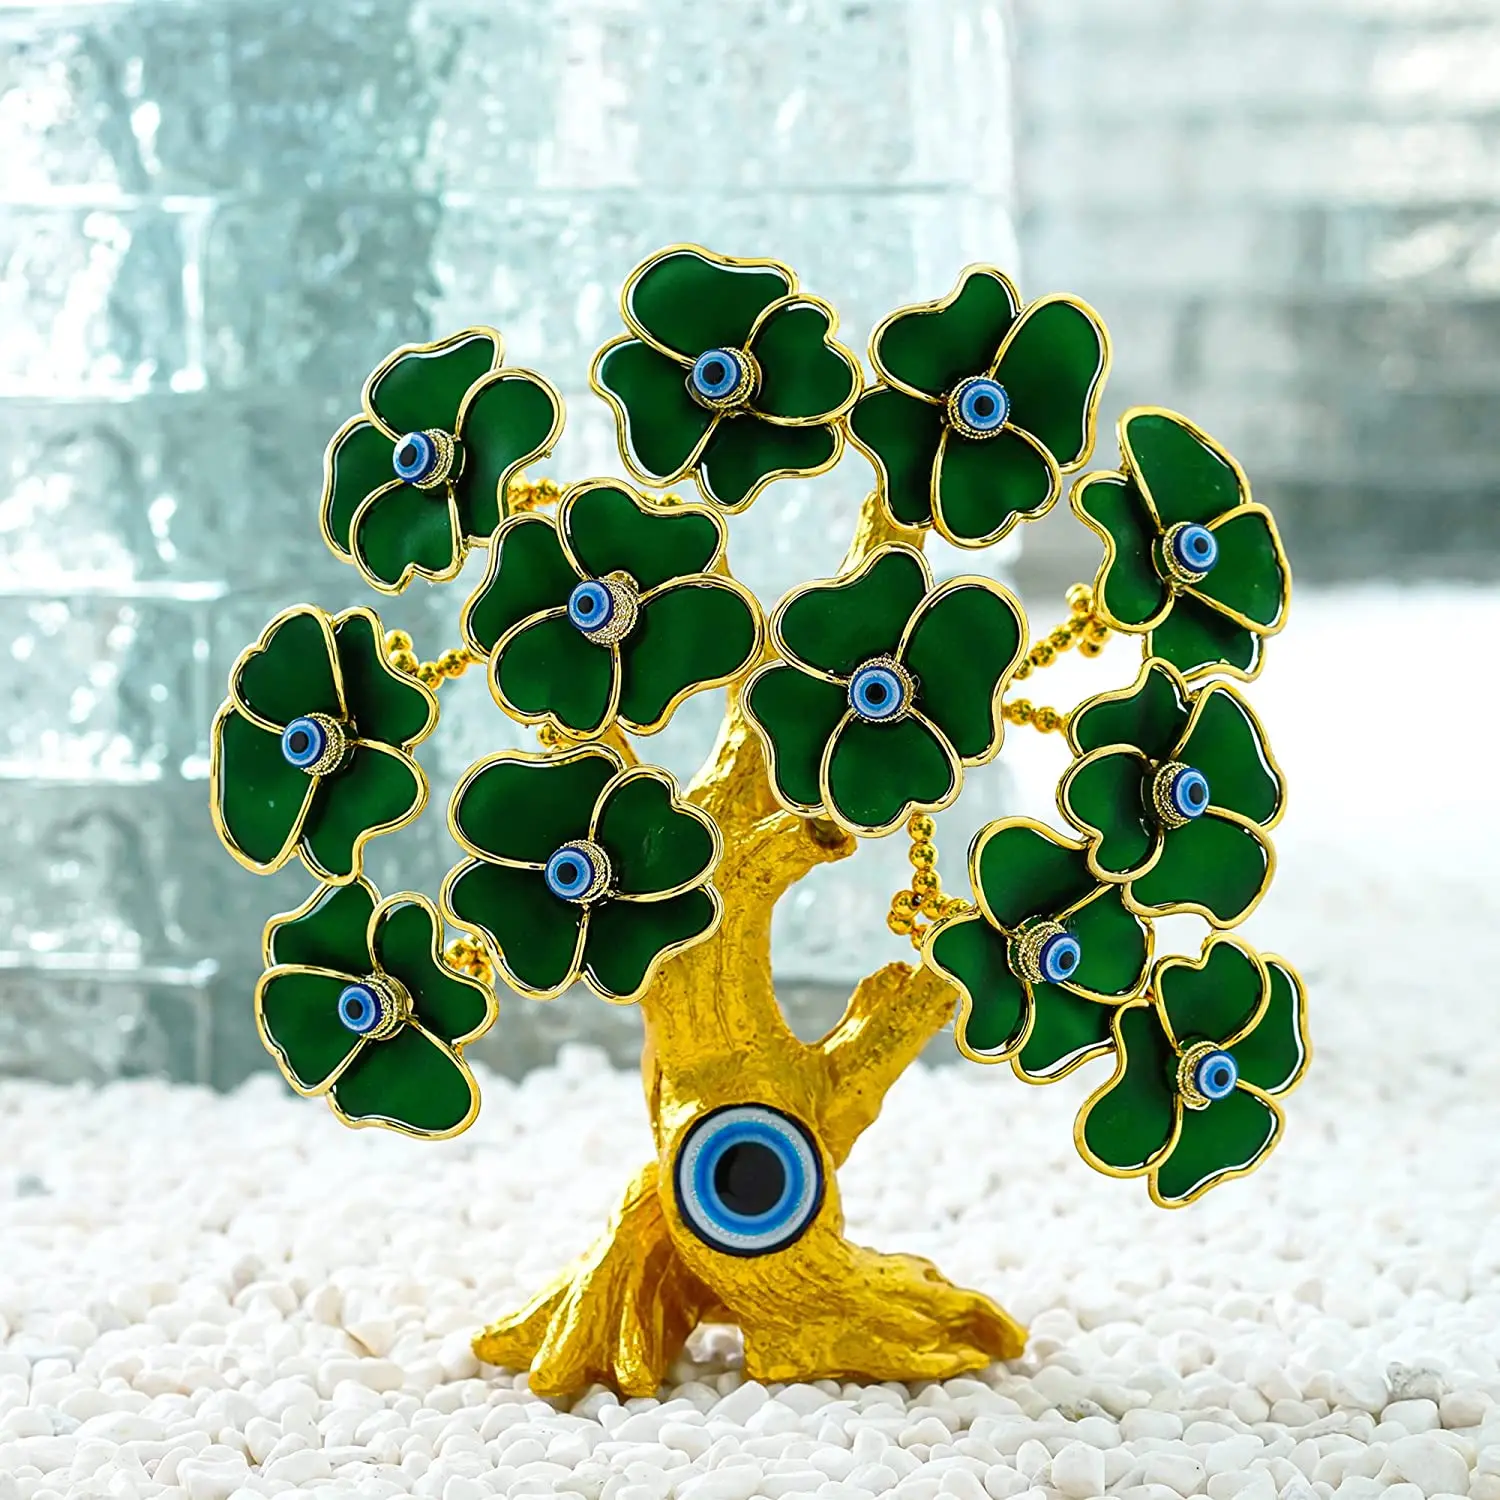 

H&D 9in Blue Evil Eye Tree Amulet with Green Flowers for Good Luck Charm Protection Feng Shui Showpiece Table Ornament